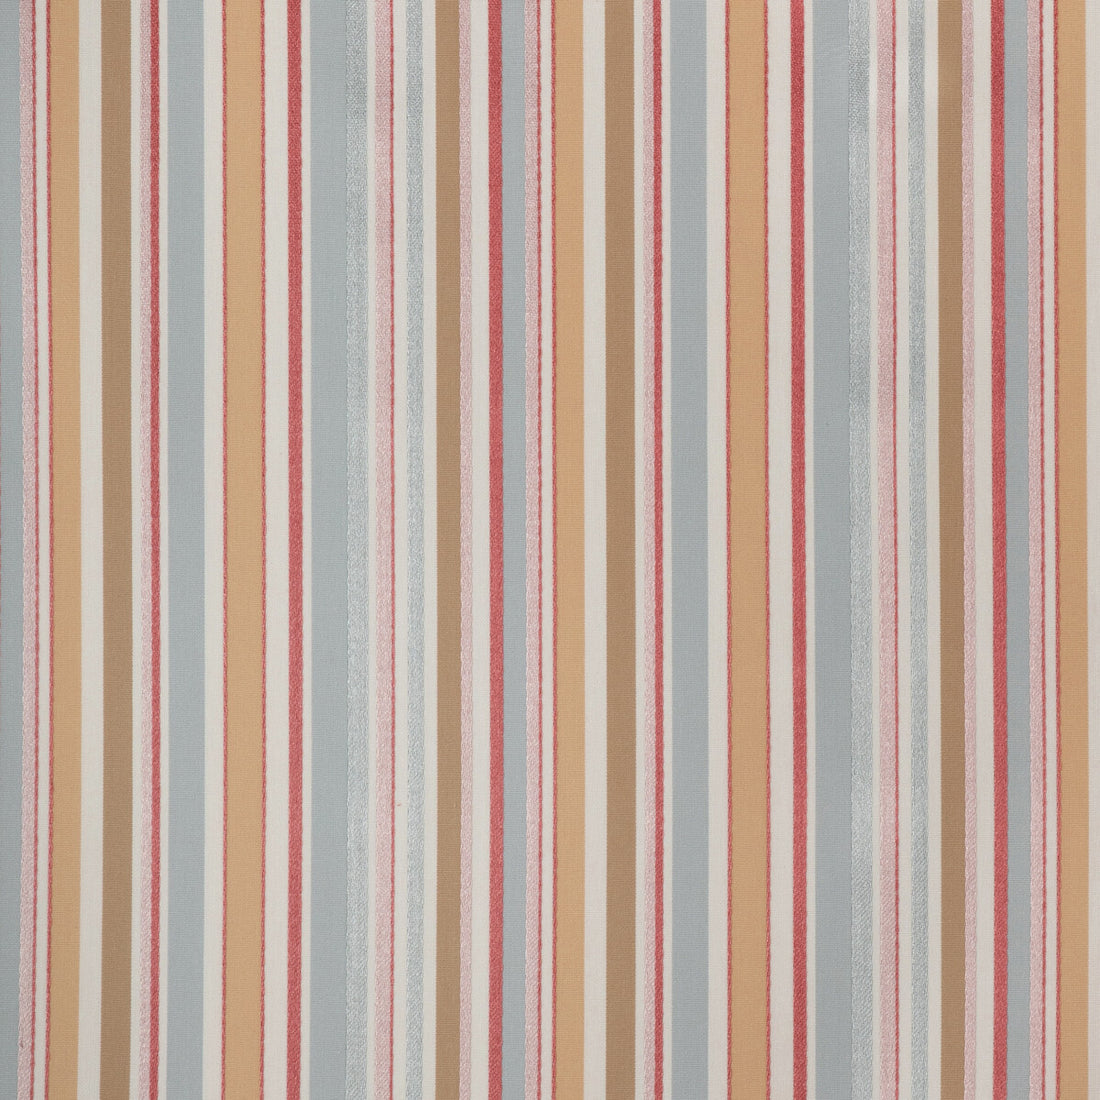 Siders Stripe fabric in rose/blue color - pattern 2023103.517.0 - by Lee Jofa in the Highfield Stripes And Plaids collection